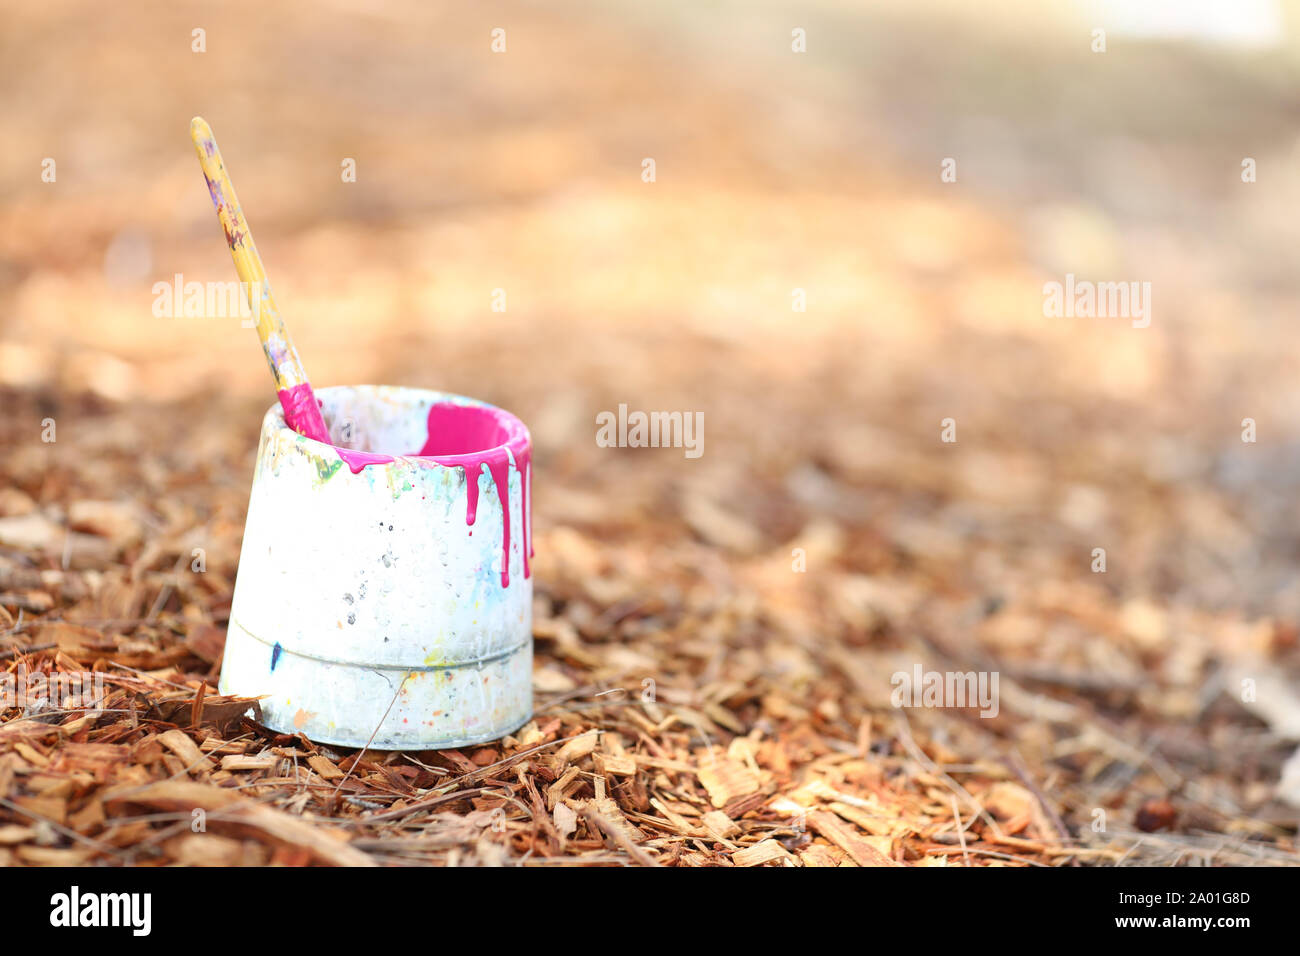 single paintbrush in a white paint tub. Bush, mulch, wood chip background. Creative potential concept or theme. Bright fluorescent fluro pink magenta Stock Photo